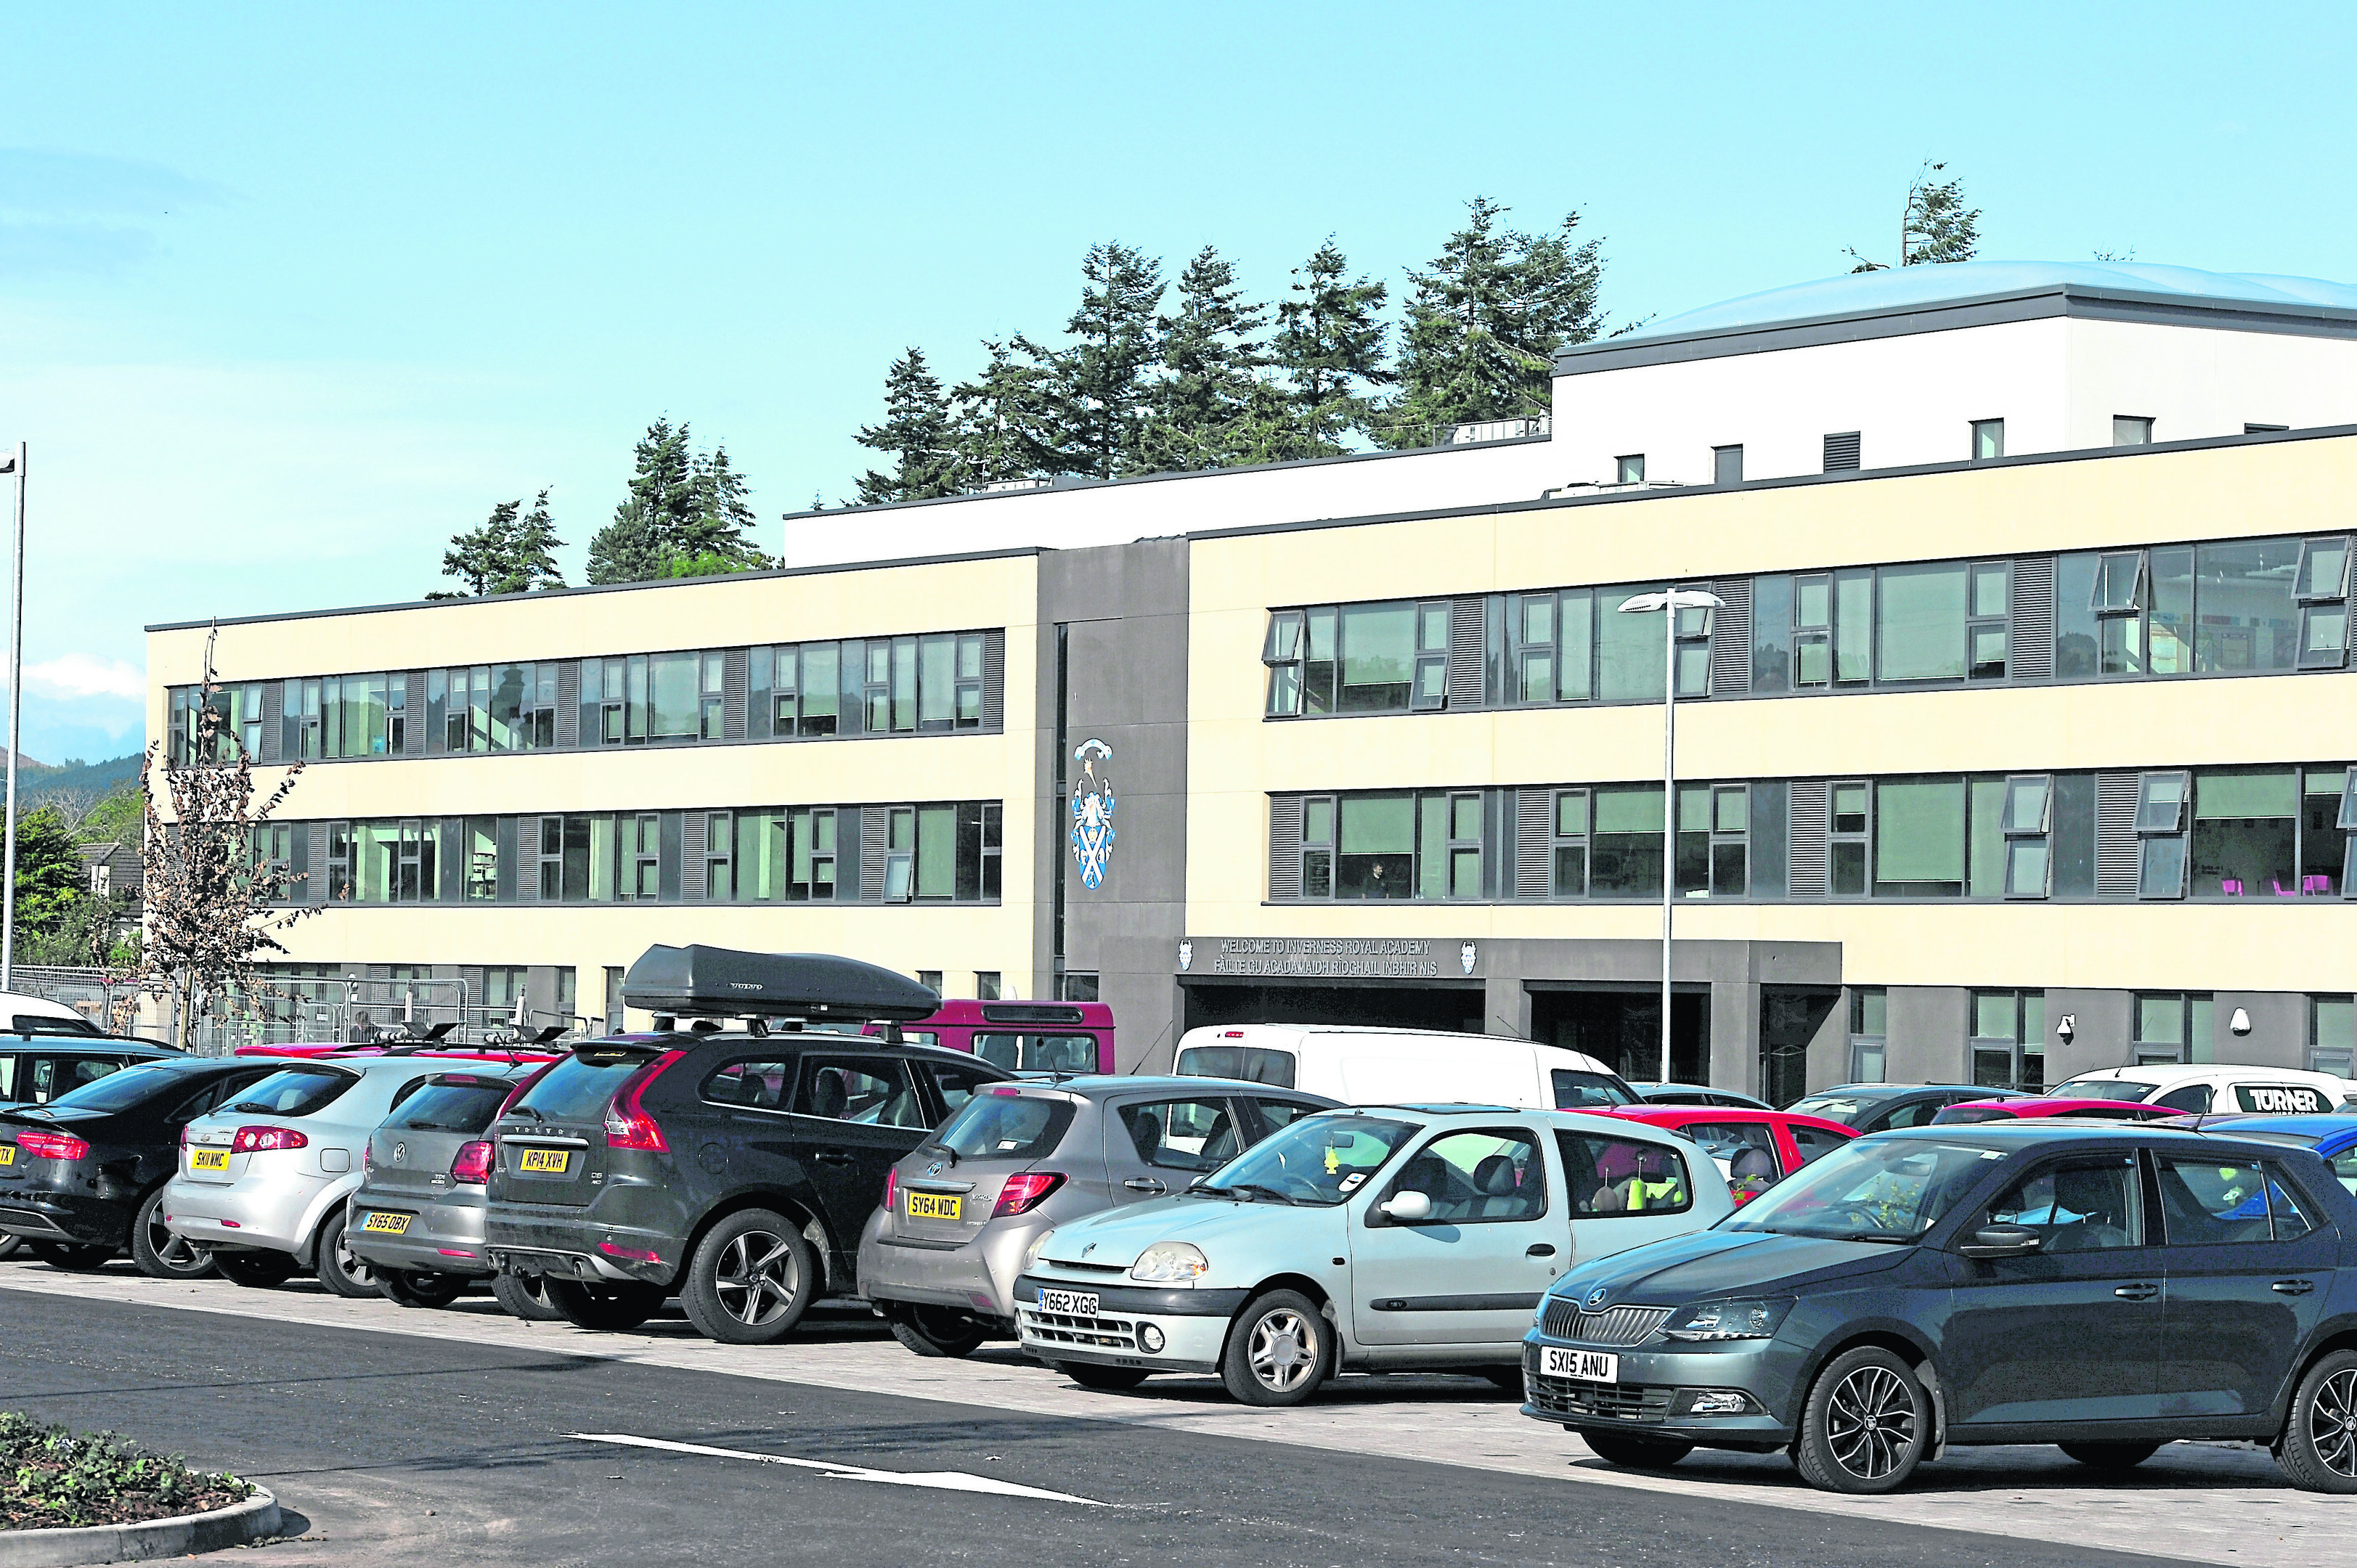 The course will be held in Inverness Royal Academy.